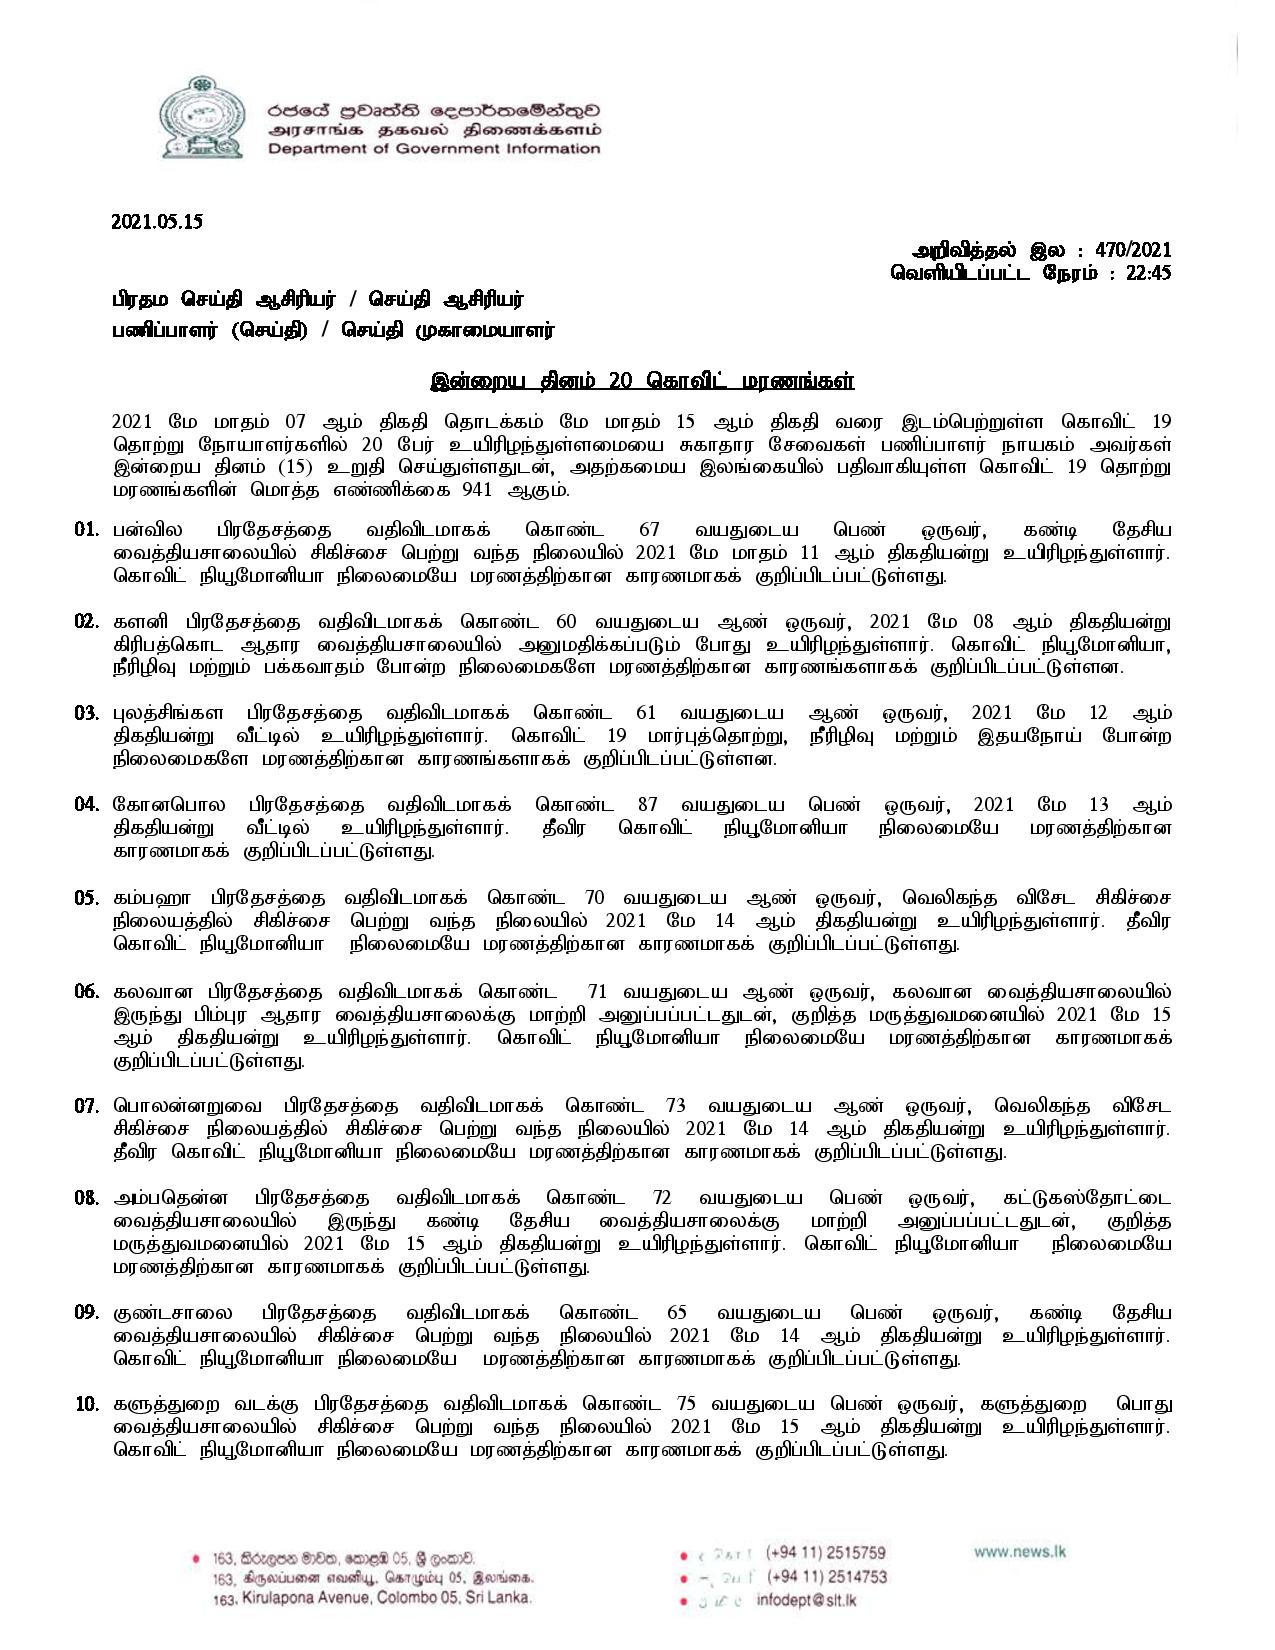 Release No 470 Tamil page 001